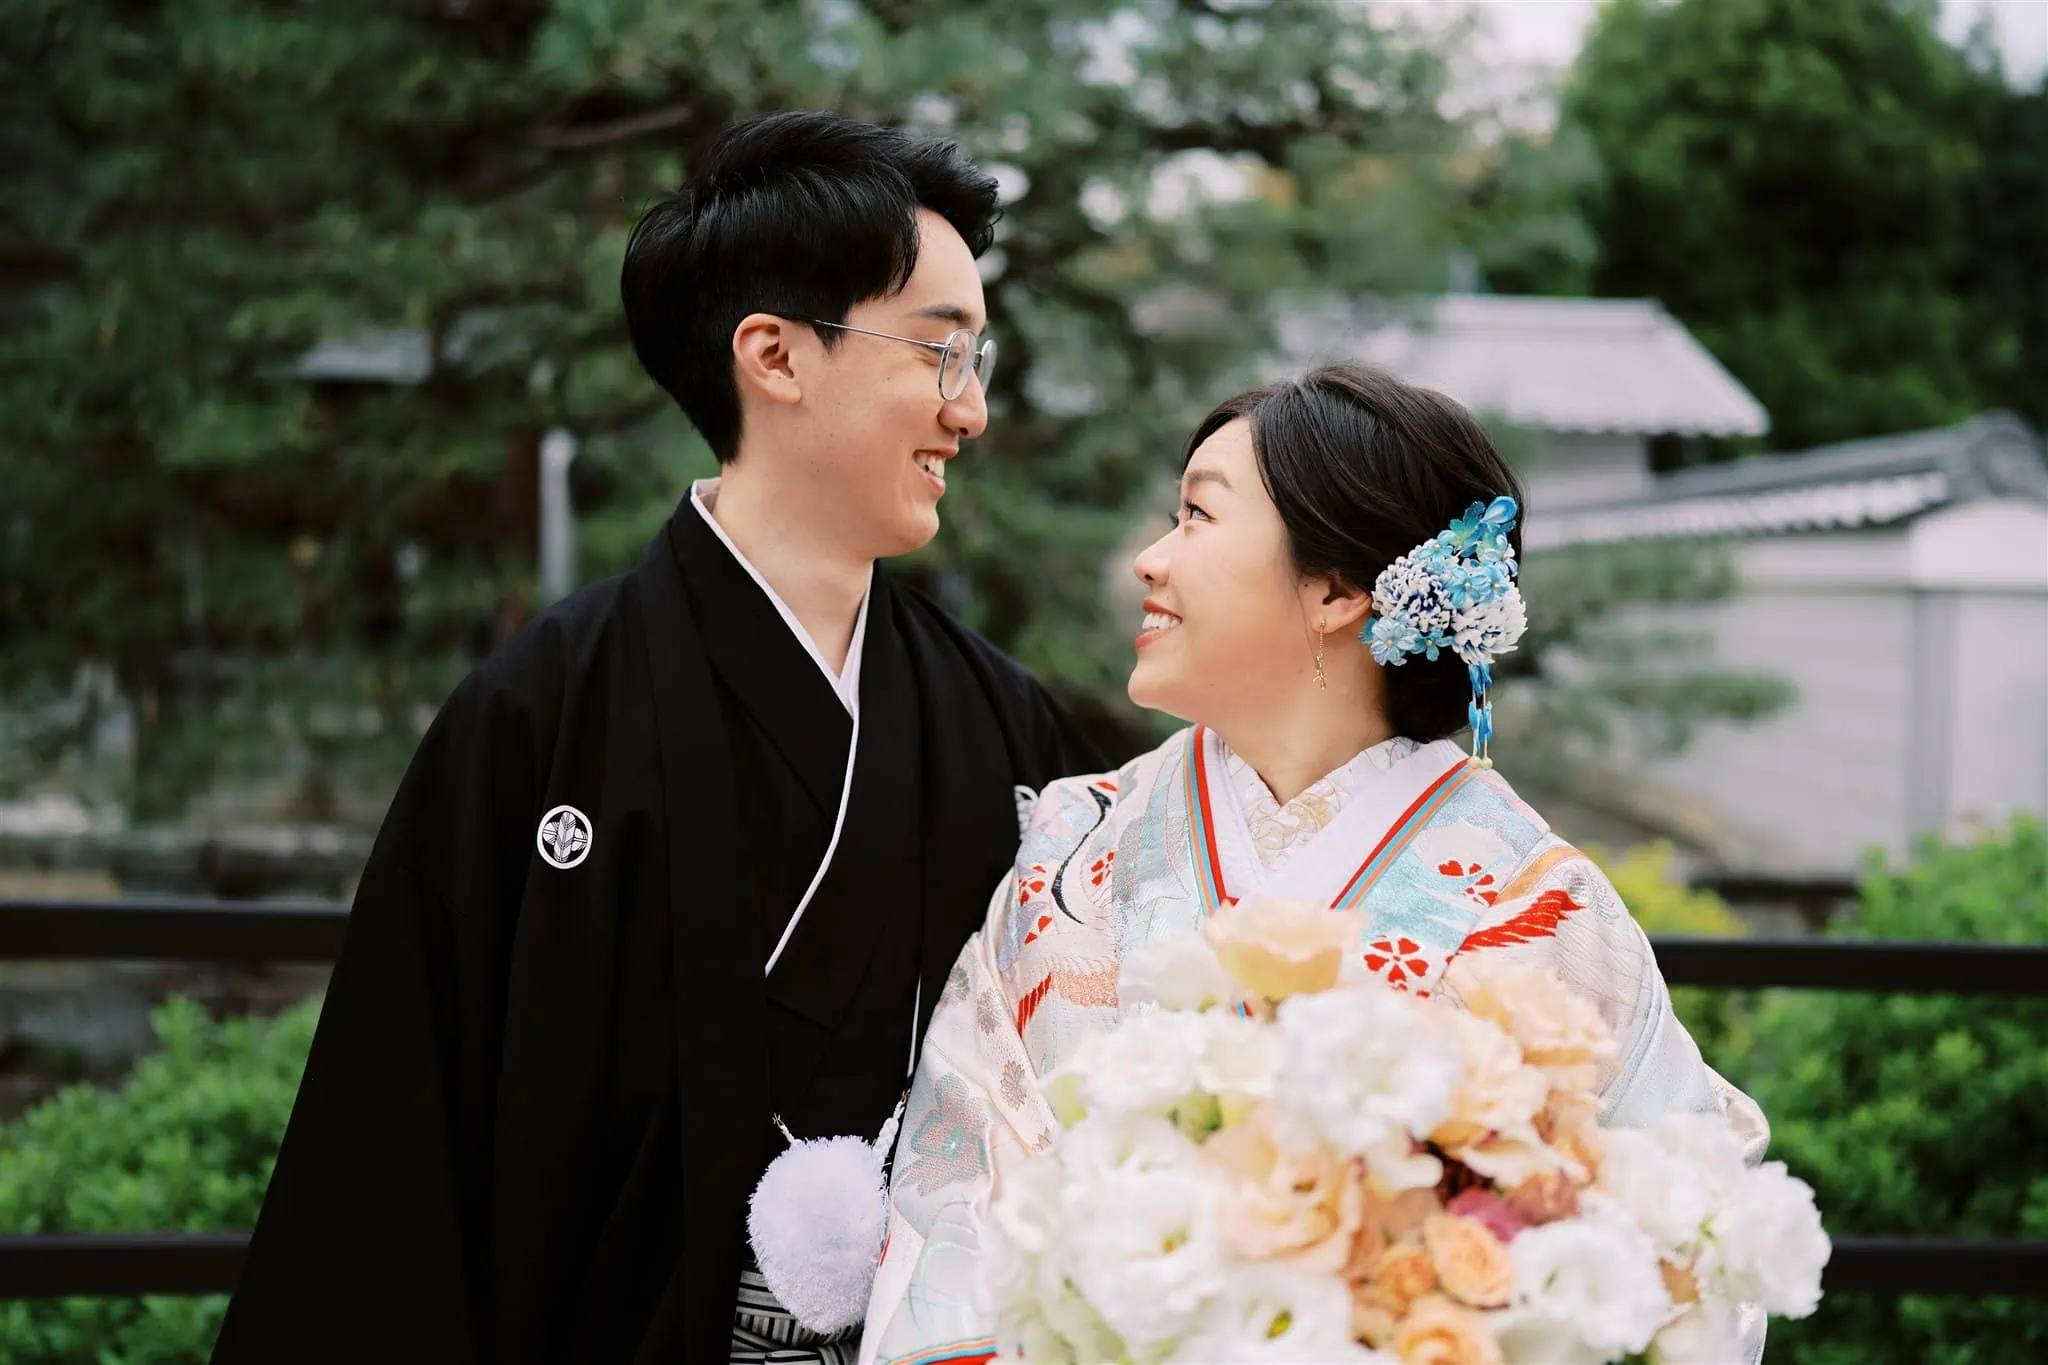 Kyoto Tokyo Japan Elopement Wedding Photographer, Planner & Videographer | A bride and groom dressed in traditional Japanese clothing captured by an elopement photographer.